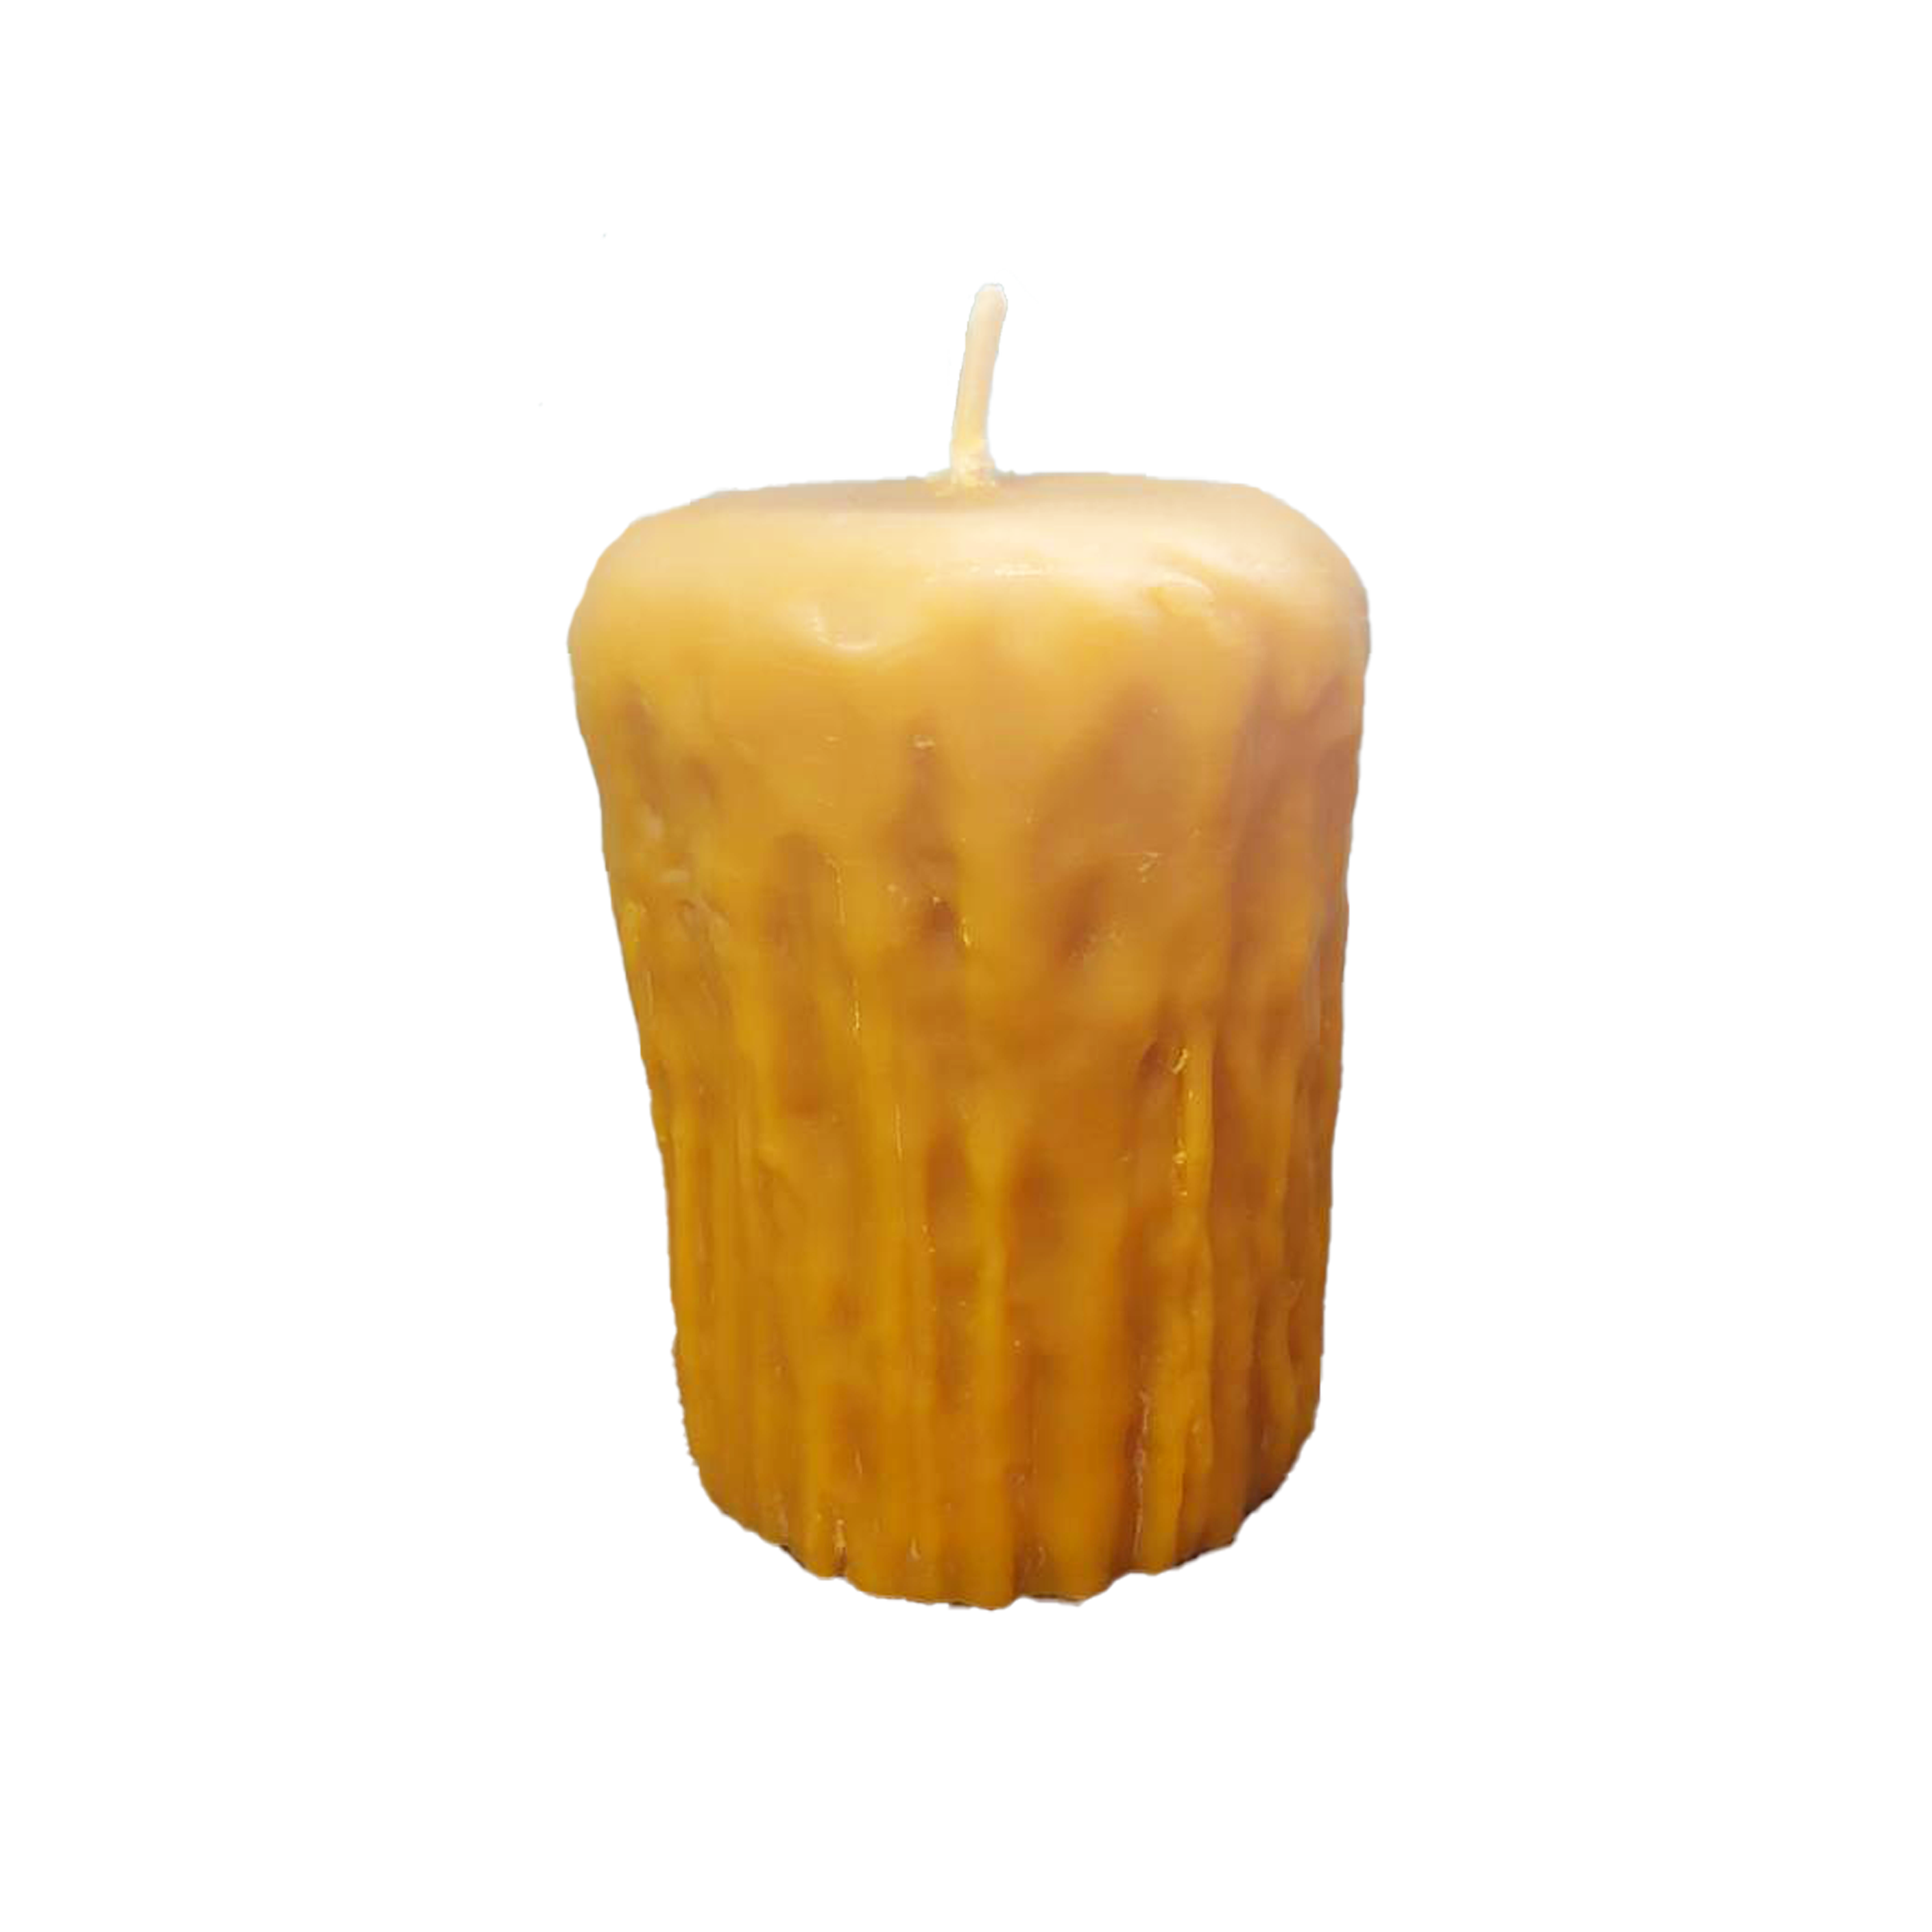 Large melted looking rustic beeswax candle